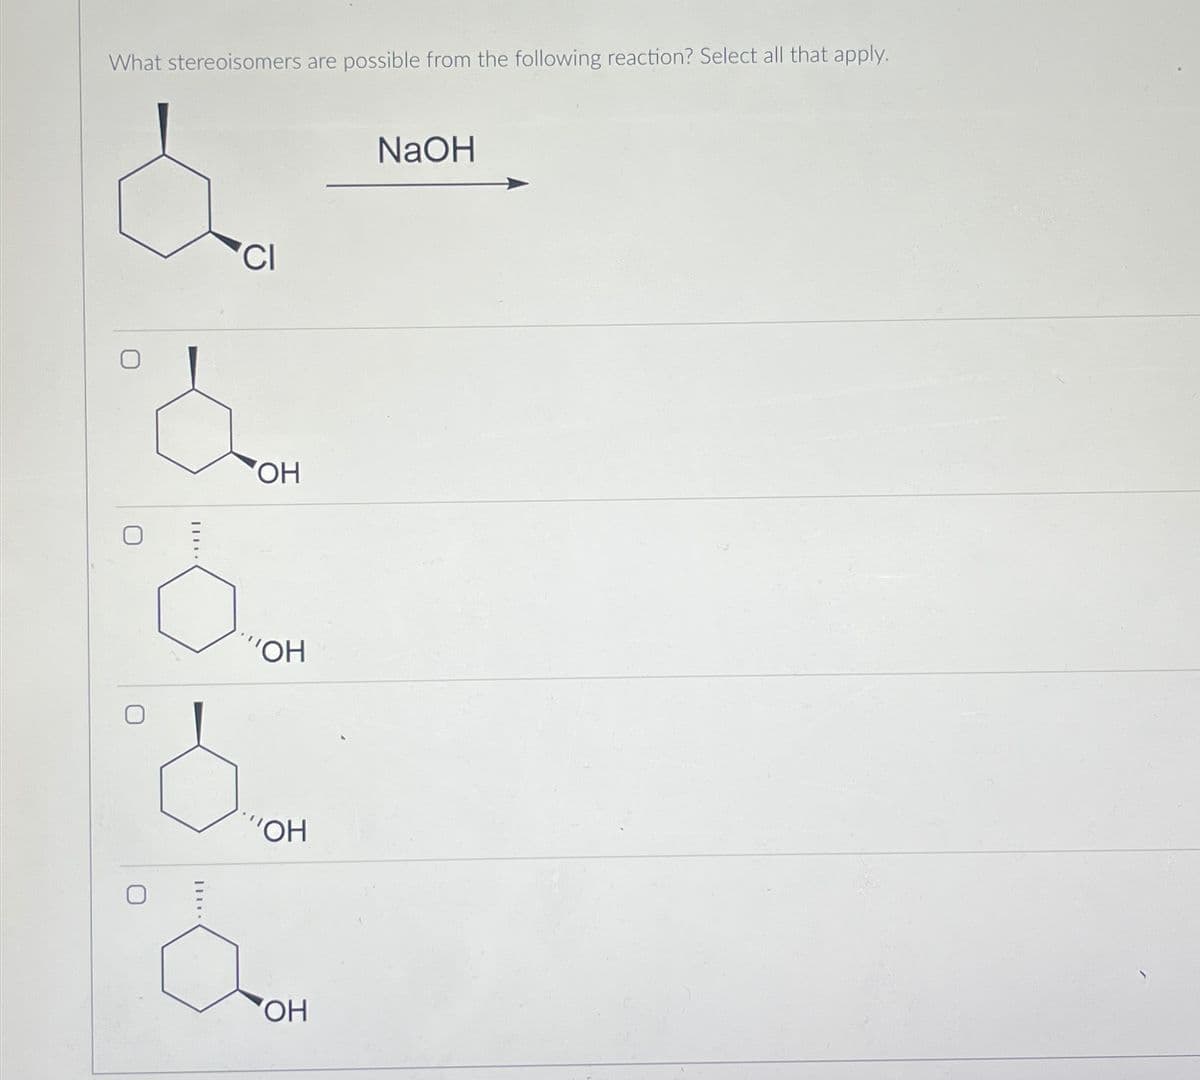 What stereoisomers are possible from the following reaction? Select all that apply.
U
Π....
CI
ΟΗ
.....
ΟΗ
NaOH
''ΟΗ
ΟΗ